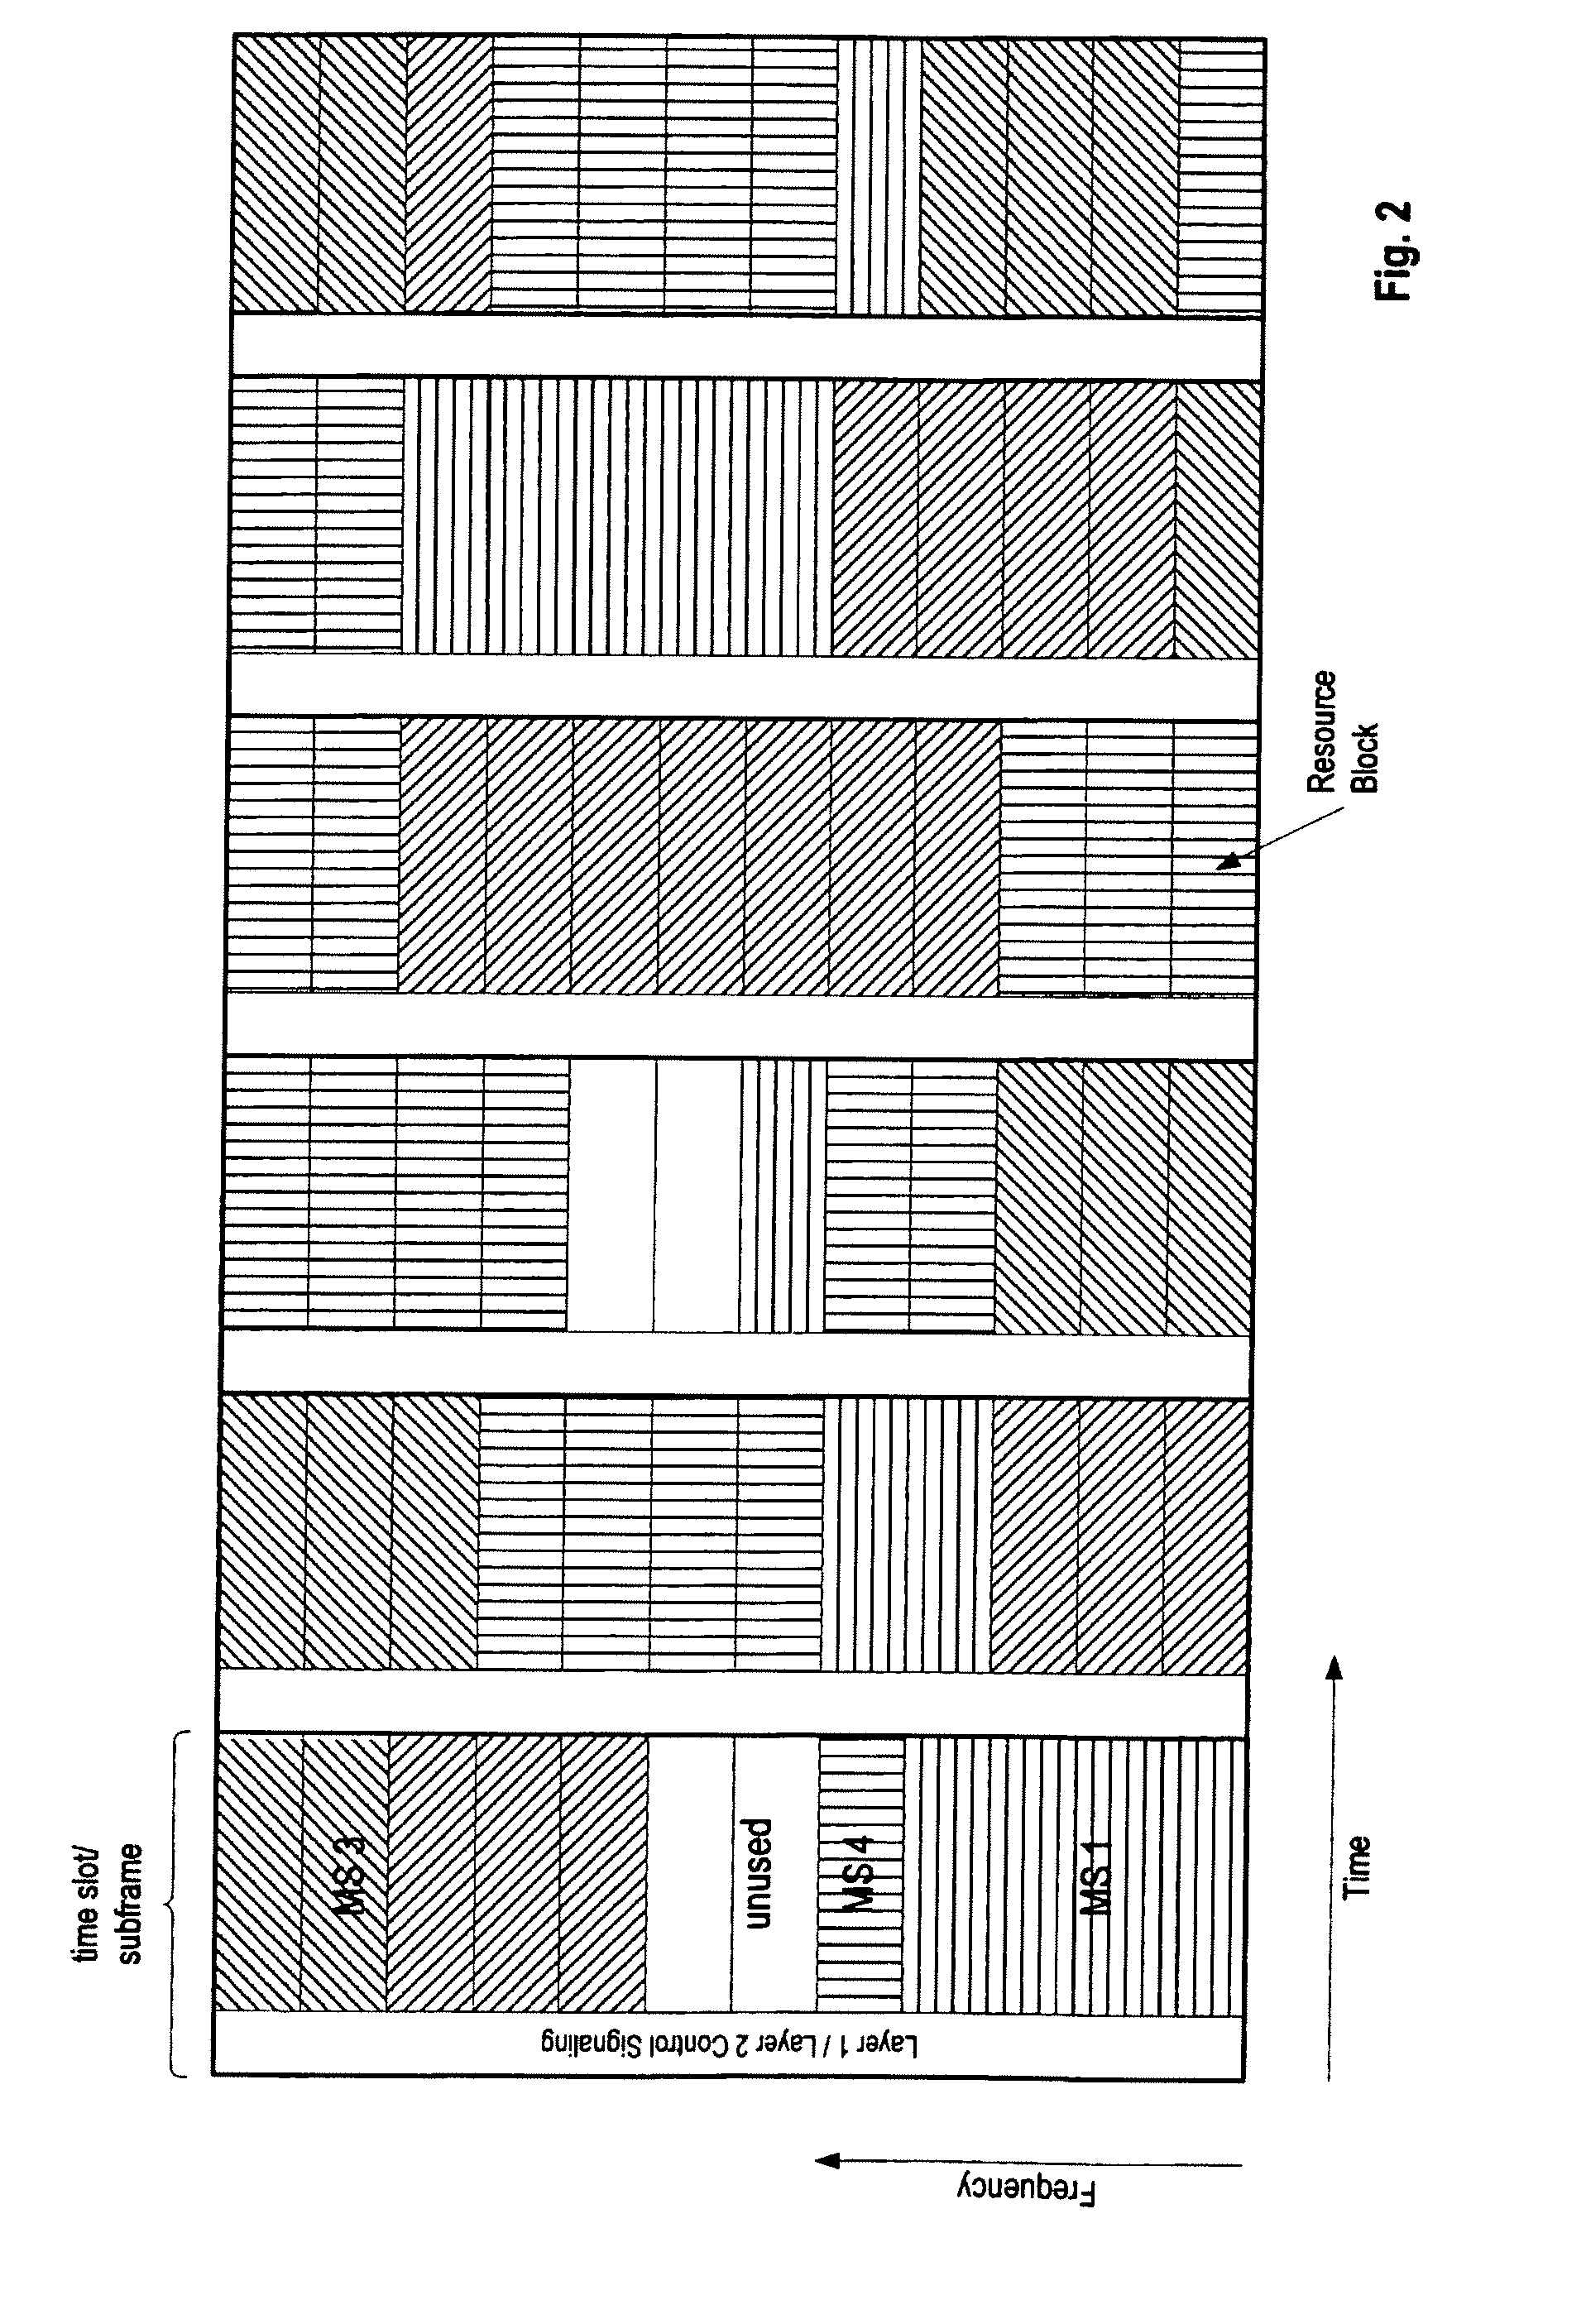 Resource reservation for users in a mobile communication system